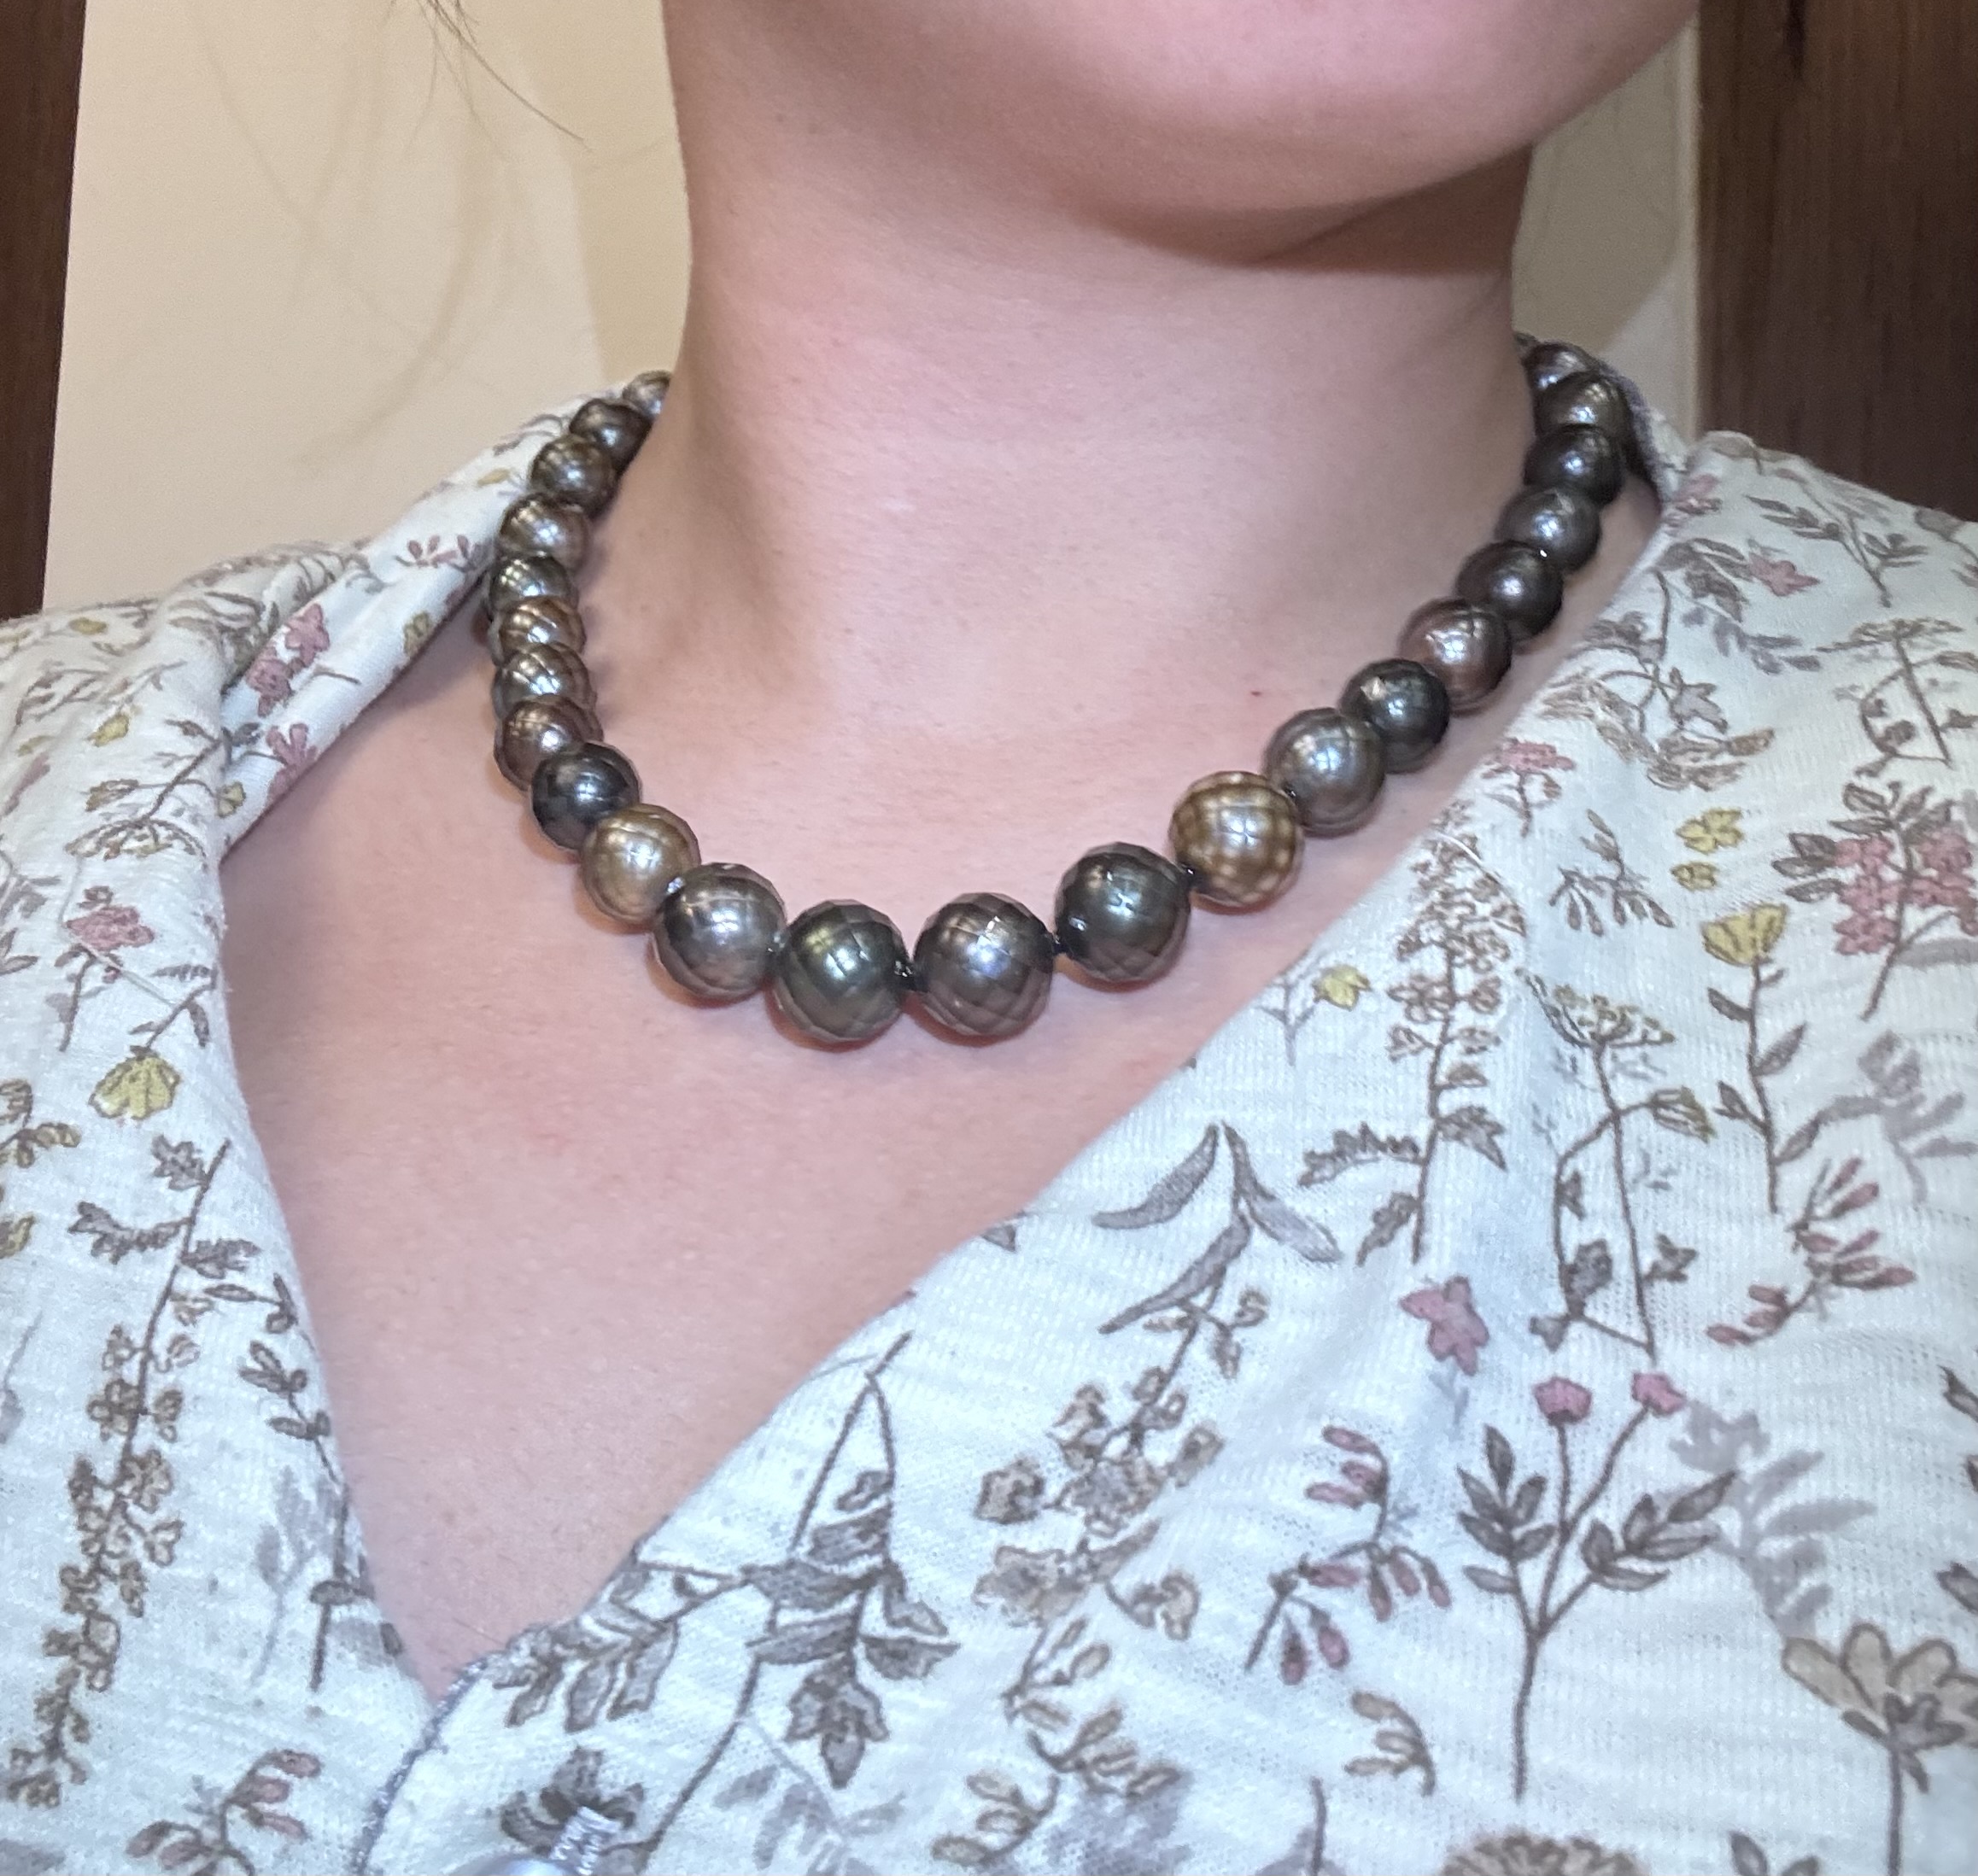 Do these faceted Tahitian pearls look “problematic”?